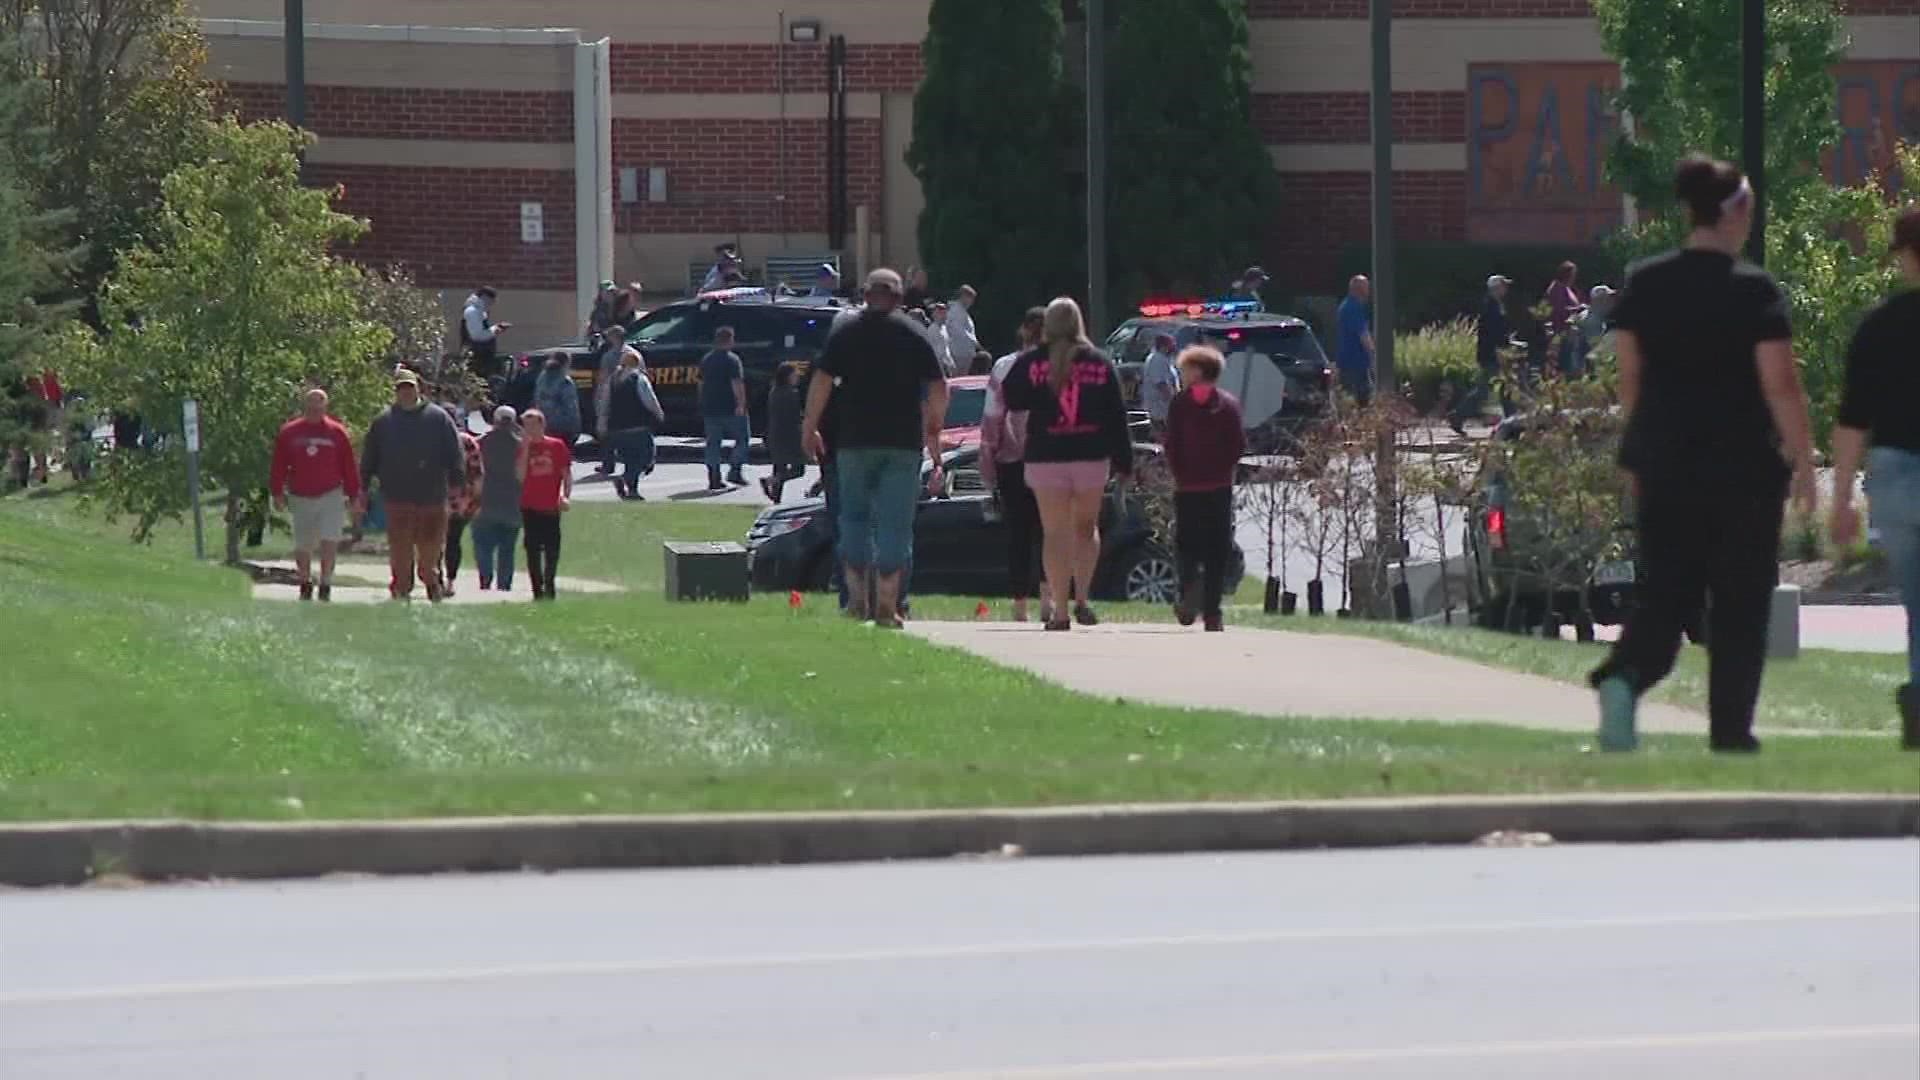 As soon as word spread about a possible active shooter, parents rushed to Licking Valley schools to see their kids.